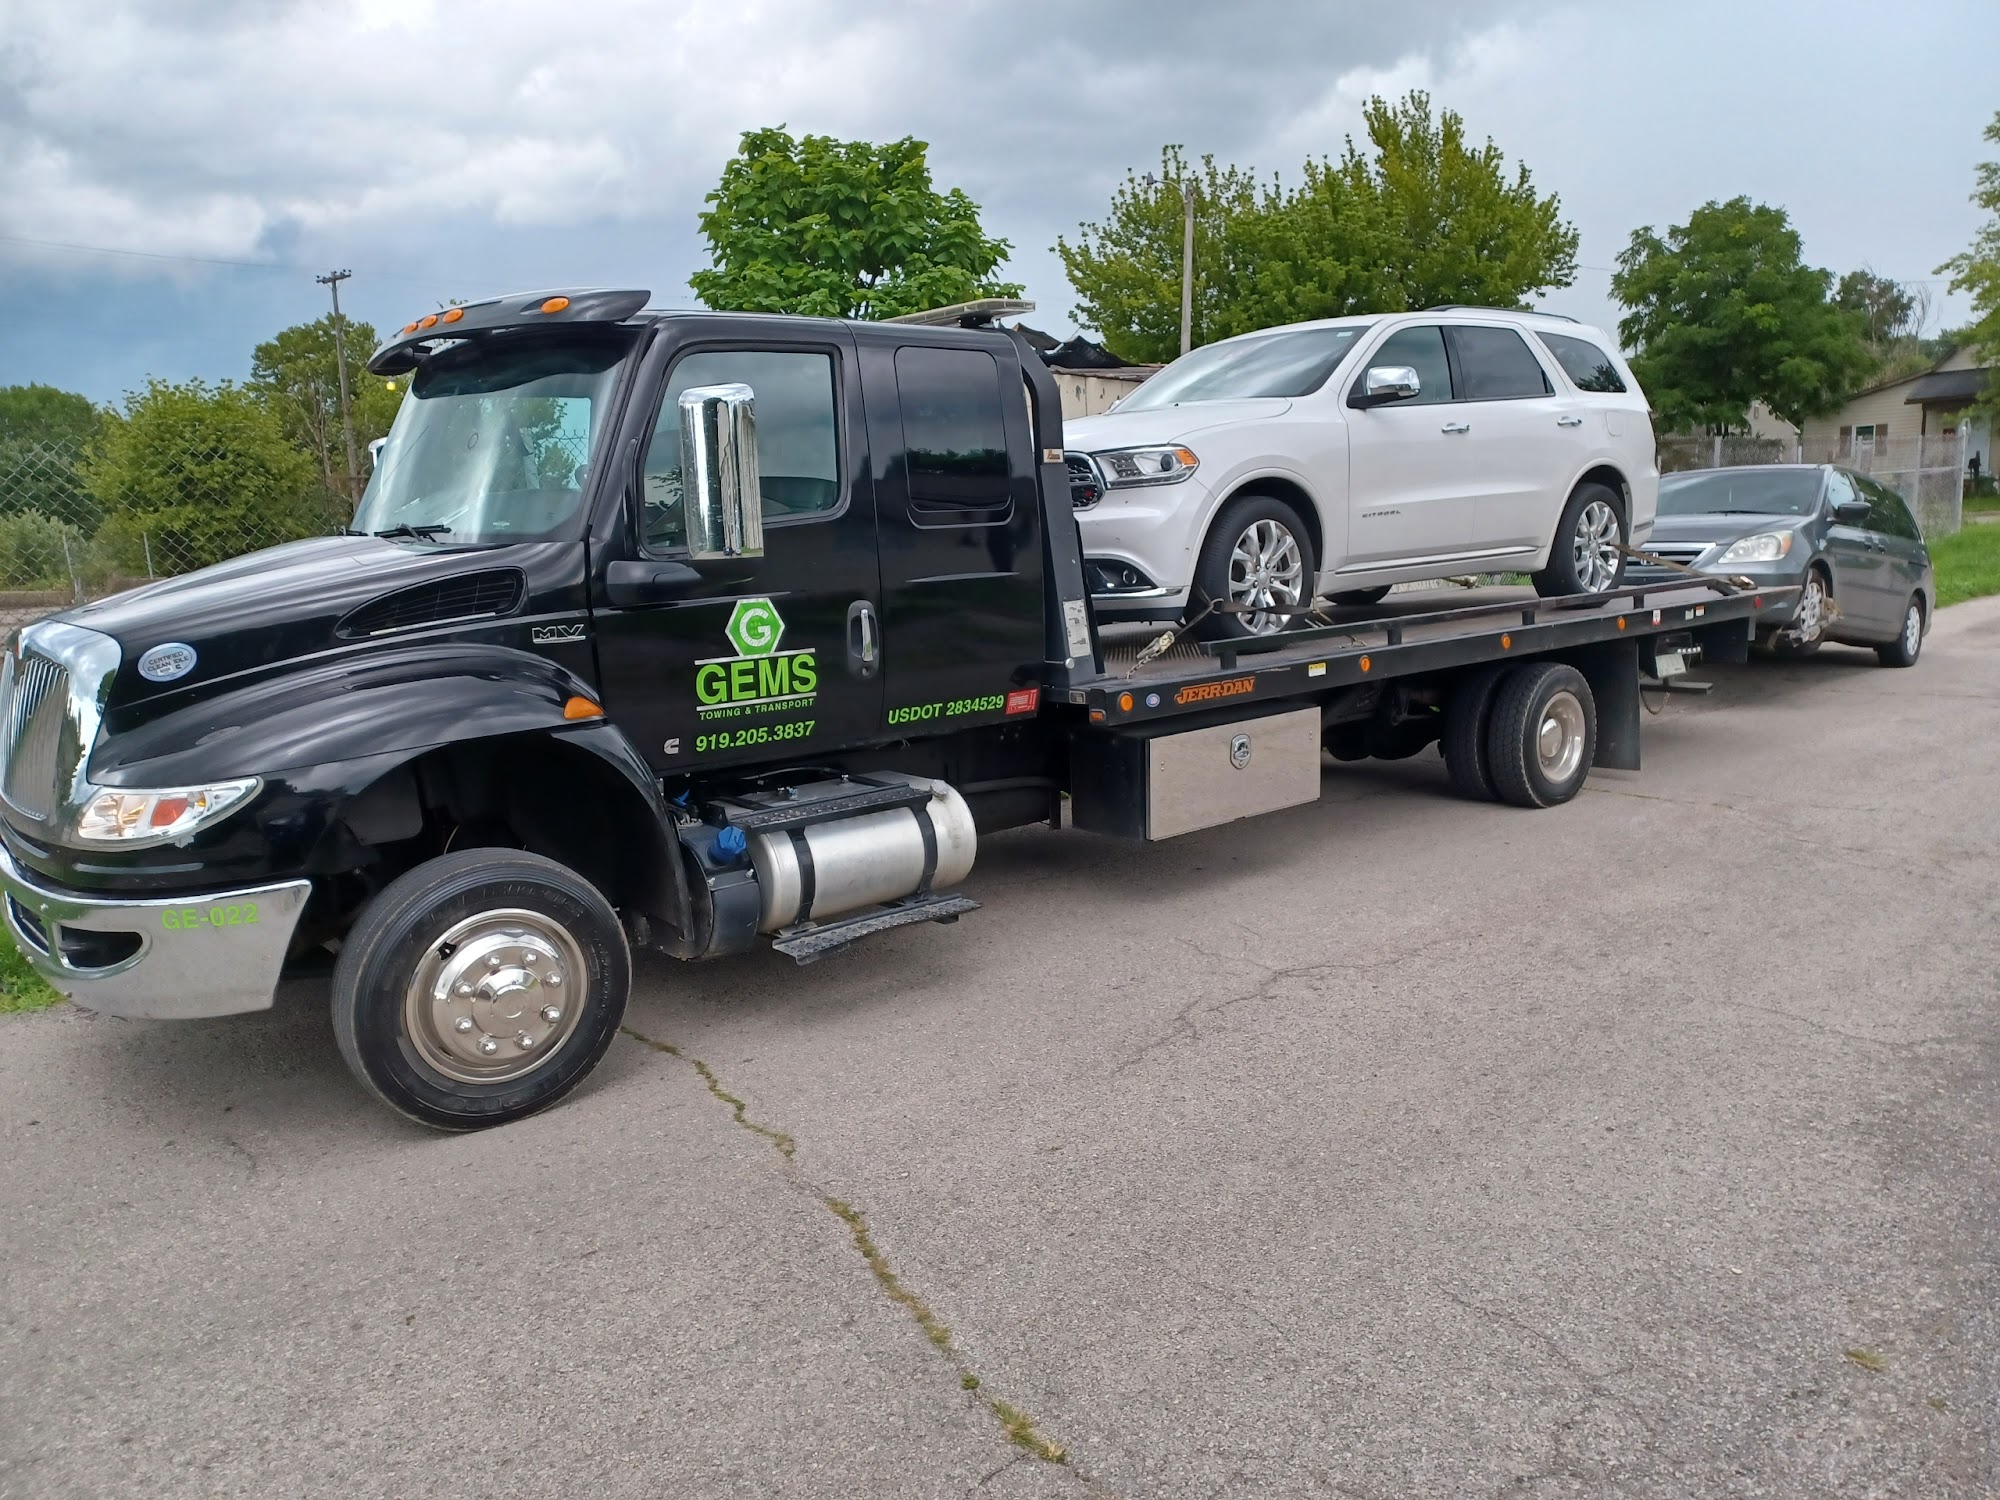 Gems Towing and Transport